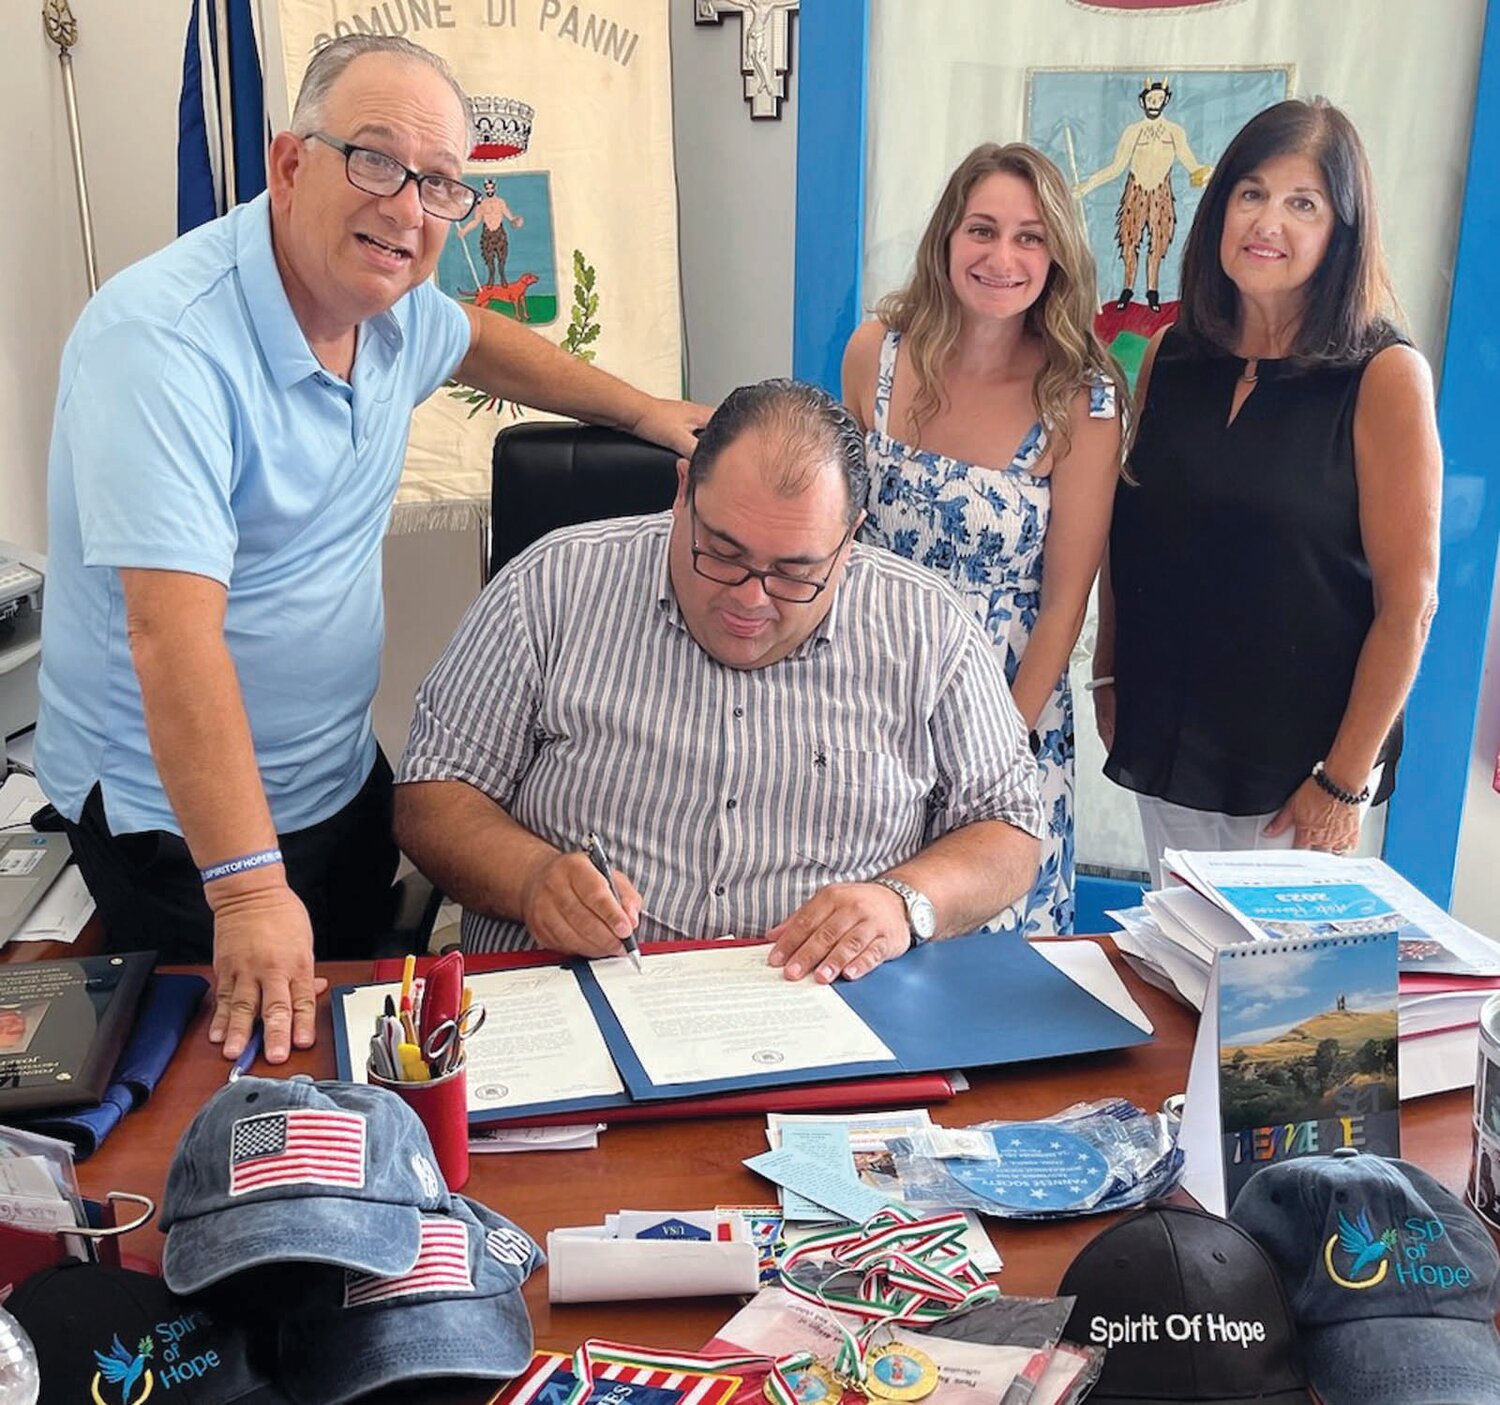 SISTER CITY: Spirit of Hope founder Louis J. Spremulli brought greetings from Johnston to the town’s “Sister City” Panni, Foggia, Italy, and their new Mayor Amedeo DiCotiis.